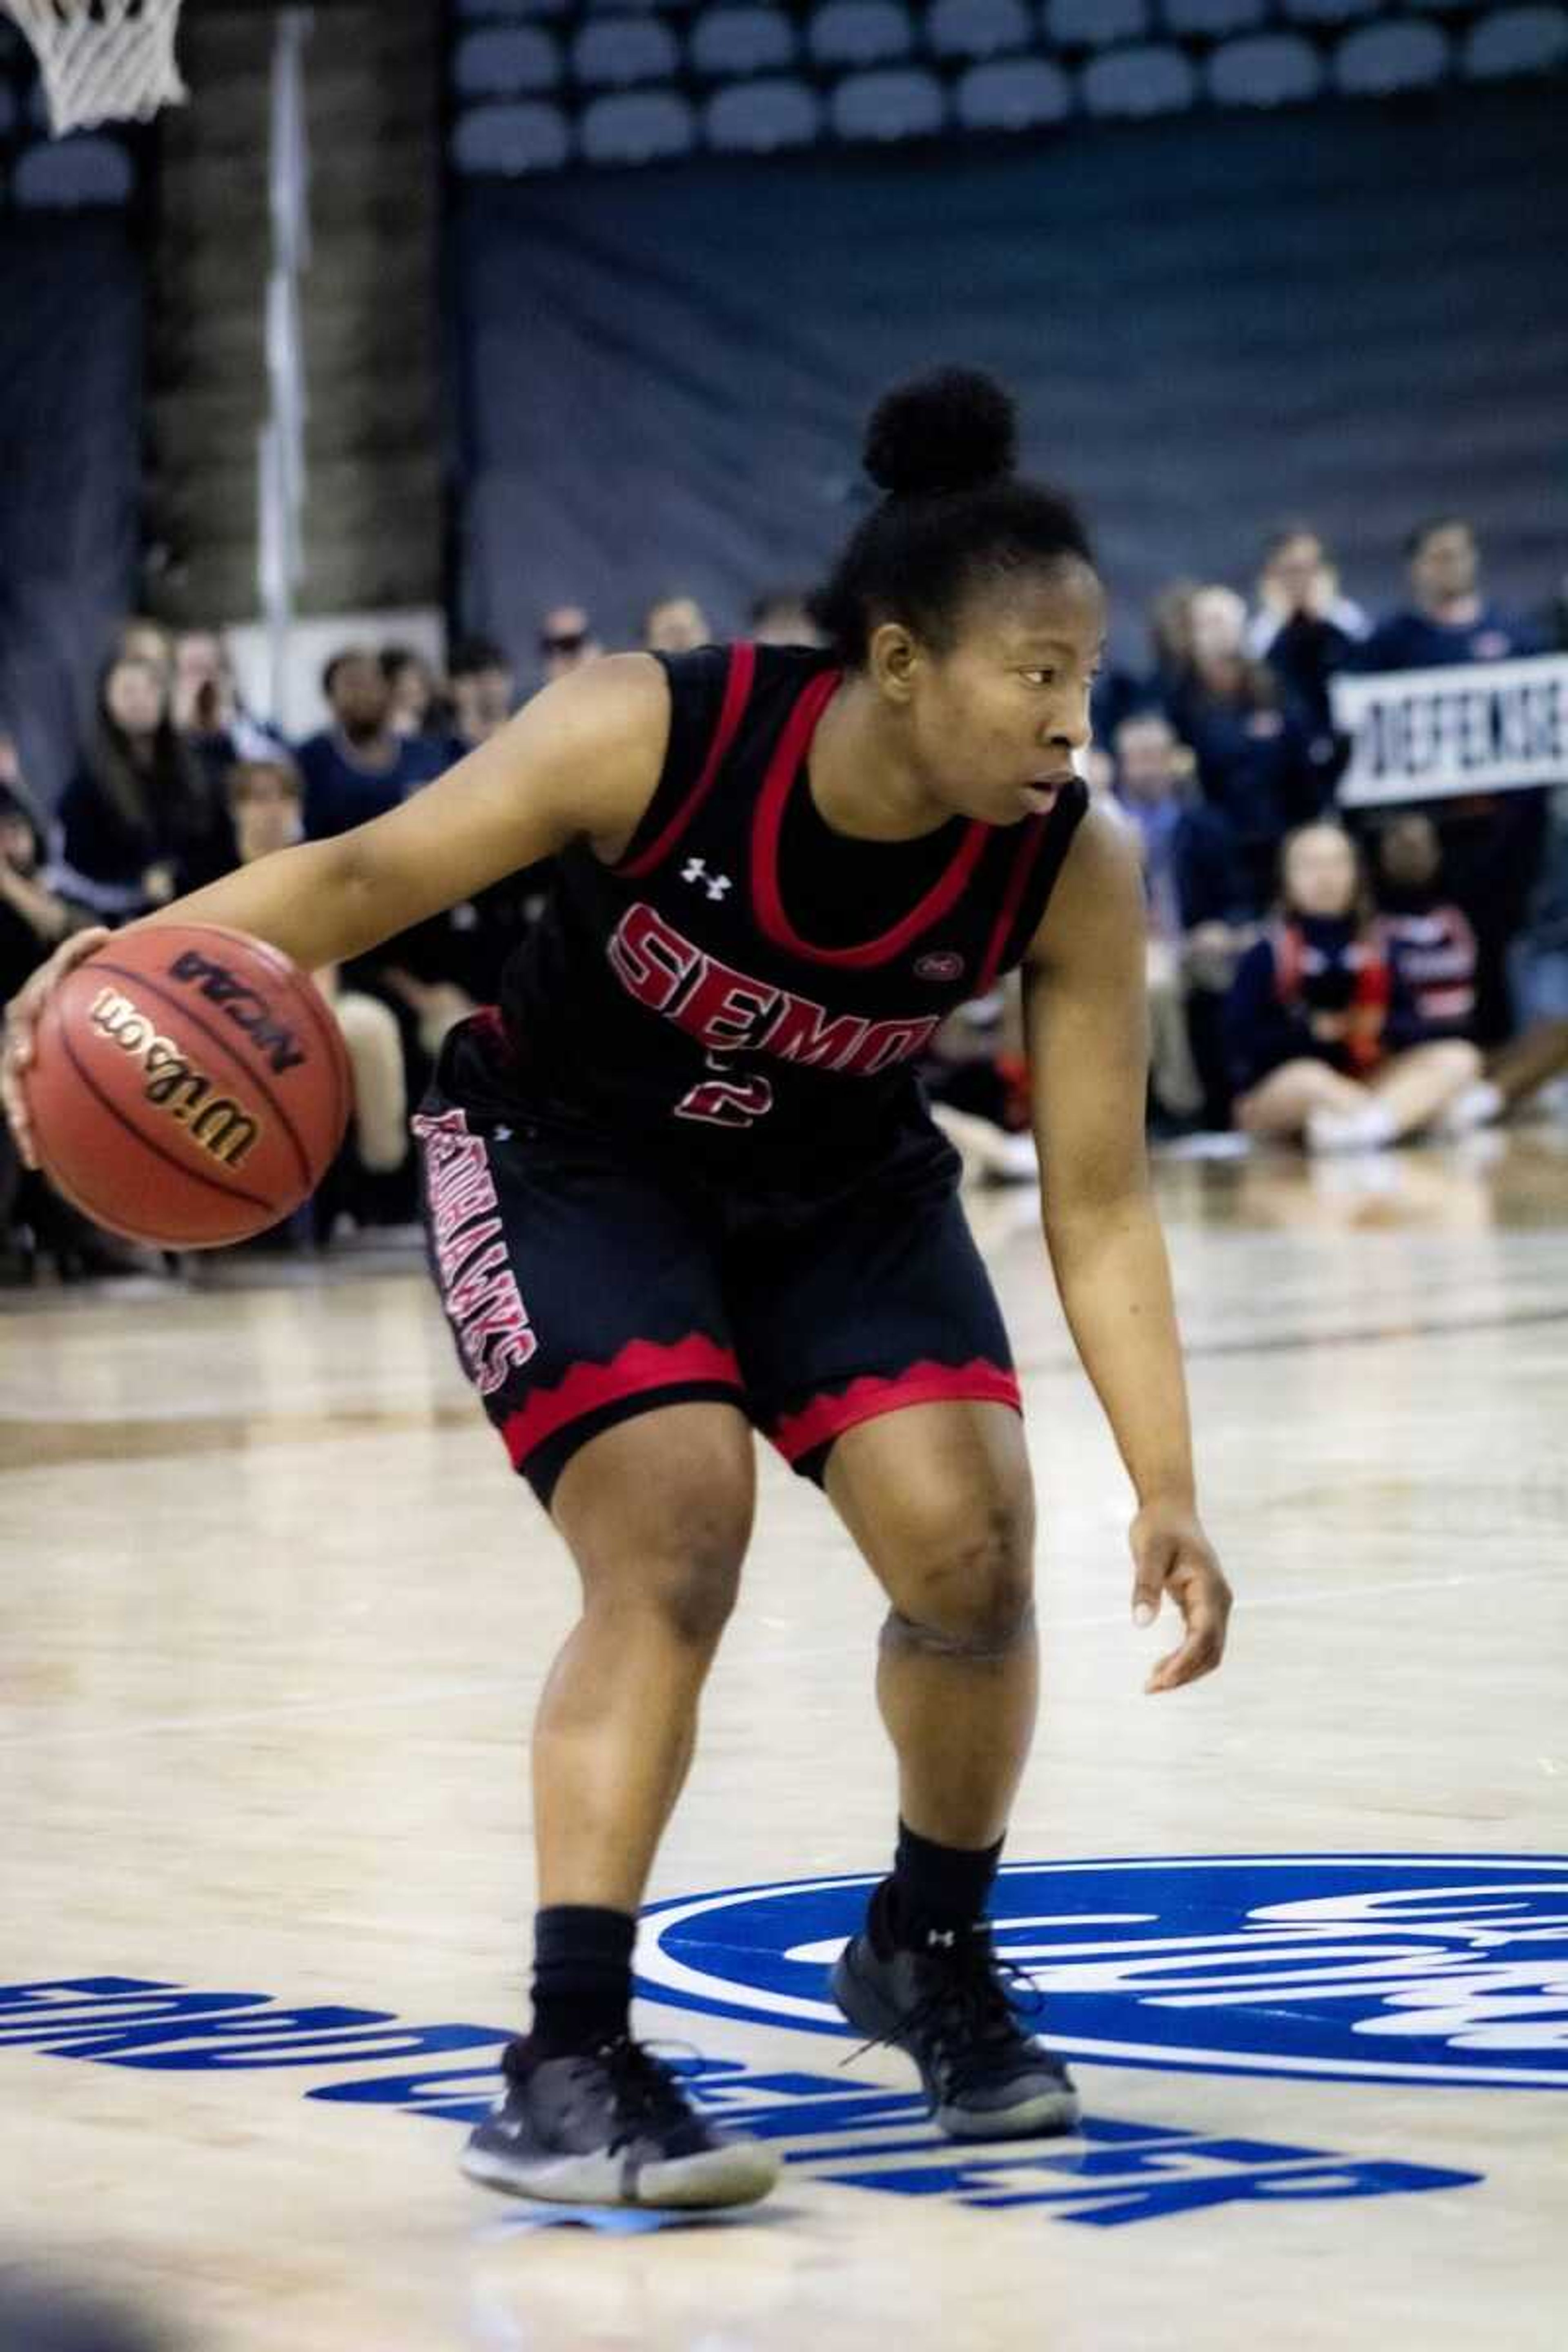 Redshirt-senior guard Carrie Shephard handles the ball during the Redhawks trip to the Ohio Valley Conference Tournament championship game on March 7.